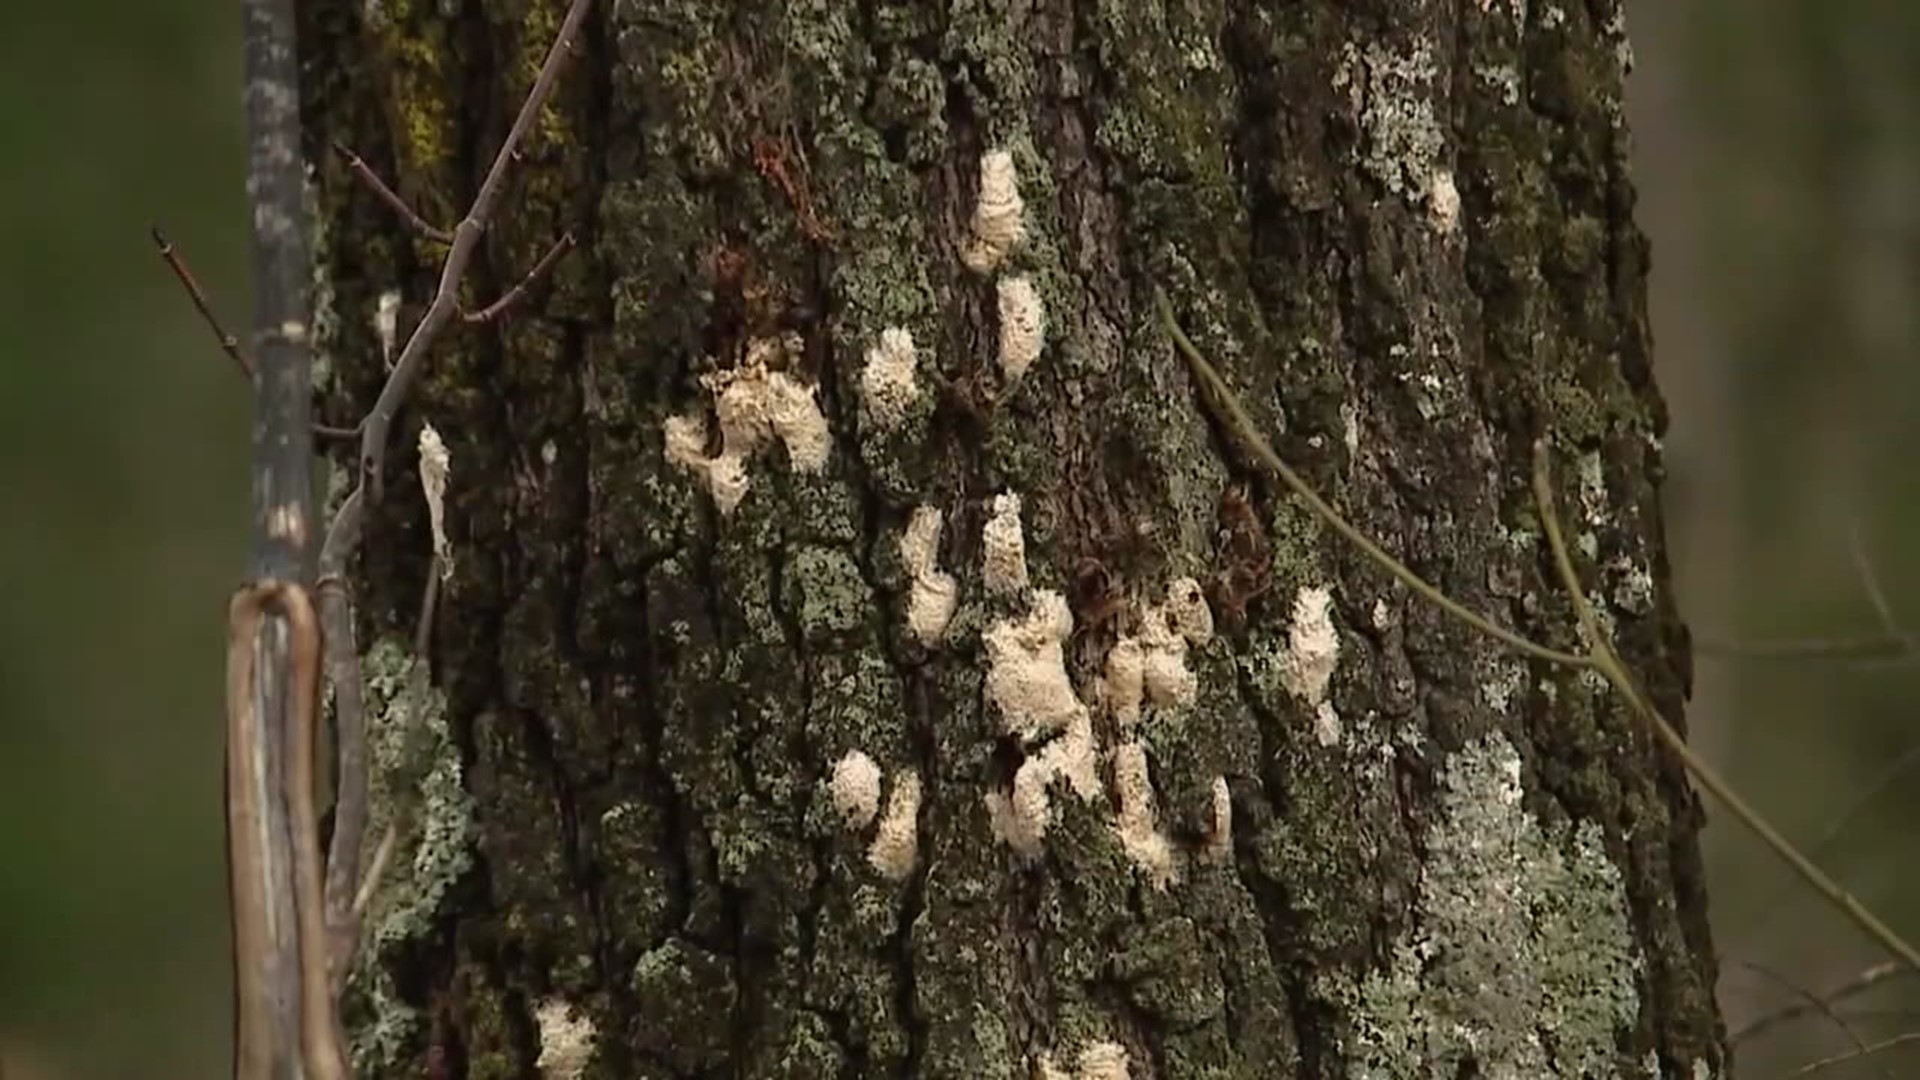 Forest health experts says defoliation may have doubled in 2022.